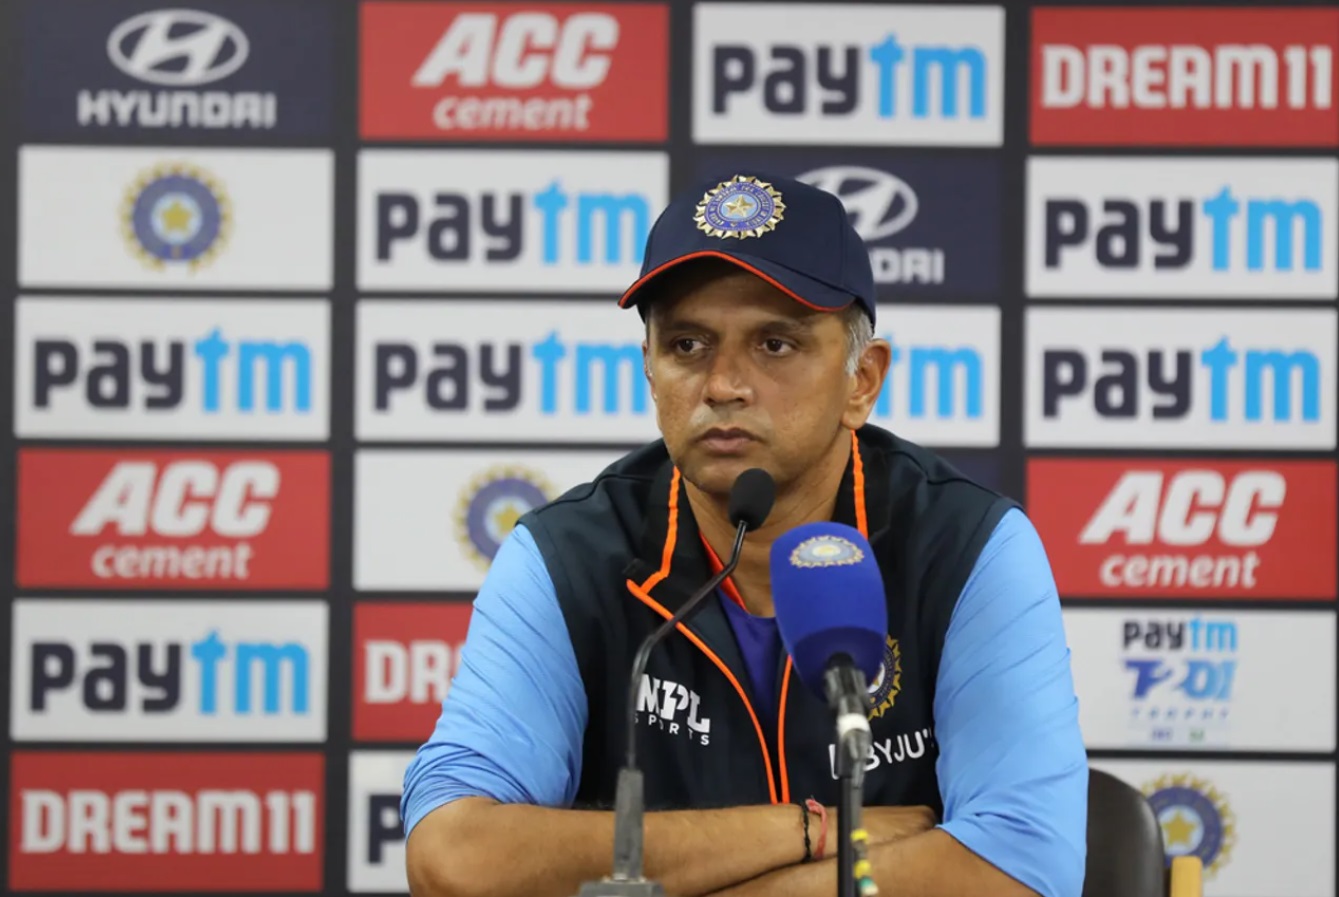 Rahul Dravid, on bowler Jasprit Bumrah’s absence from the T20 World Cup: “It’s a tremendous loss”